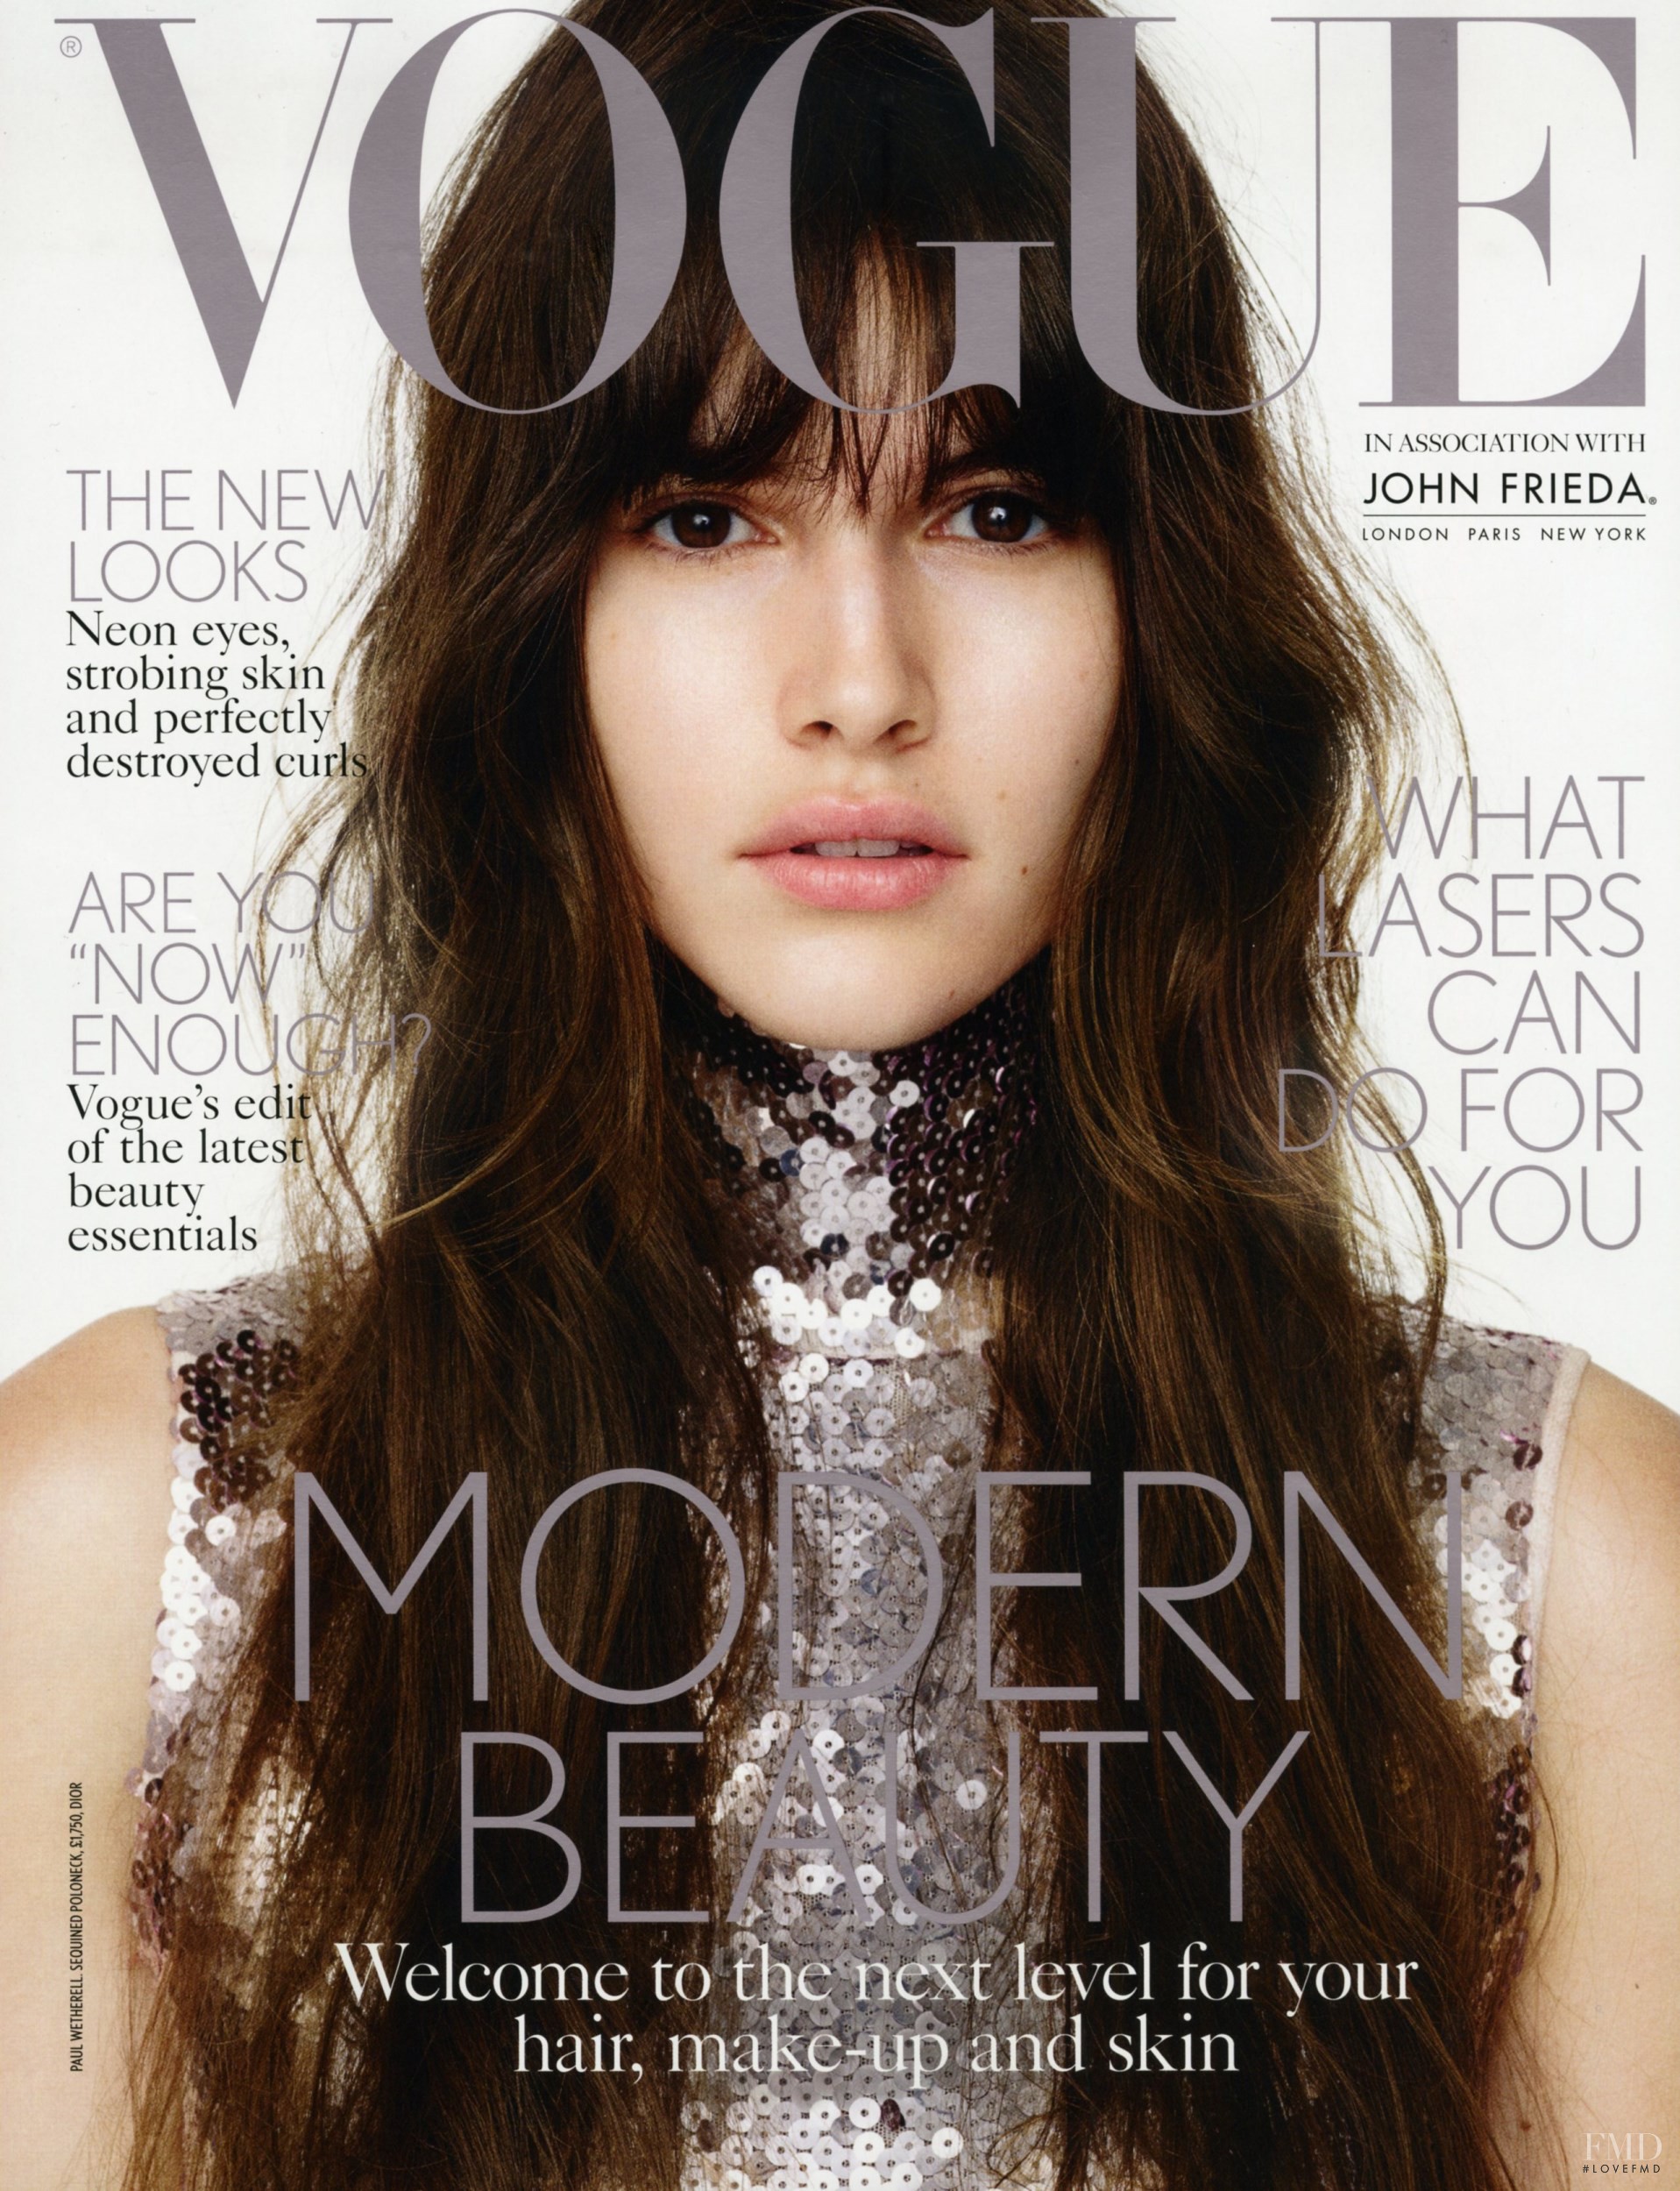 Cover of Vogue UK with Vanessa Moody, June 2015 (ID:42310)| Magazines ...